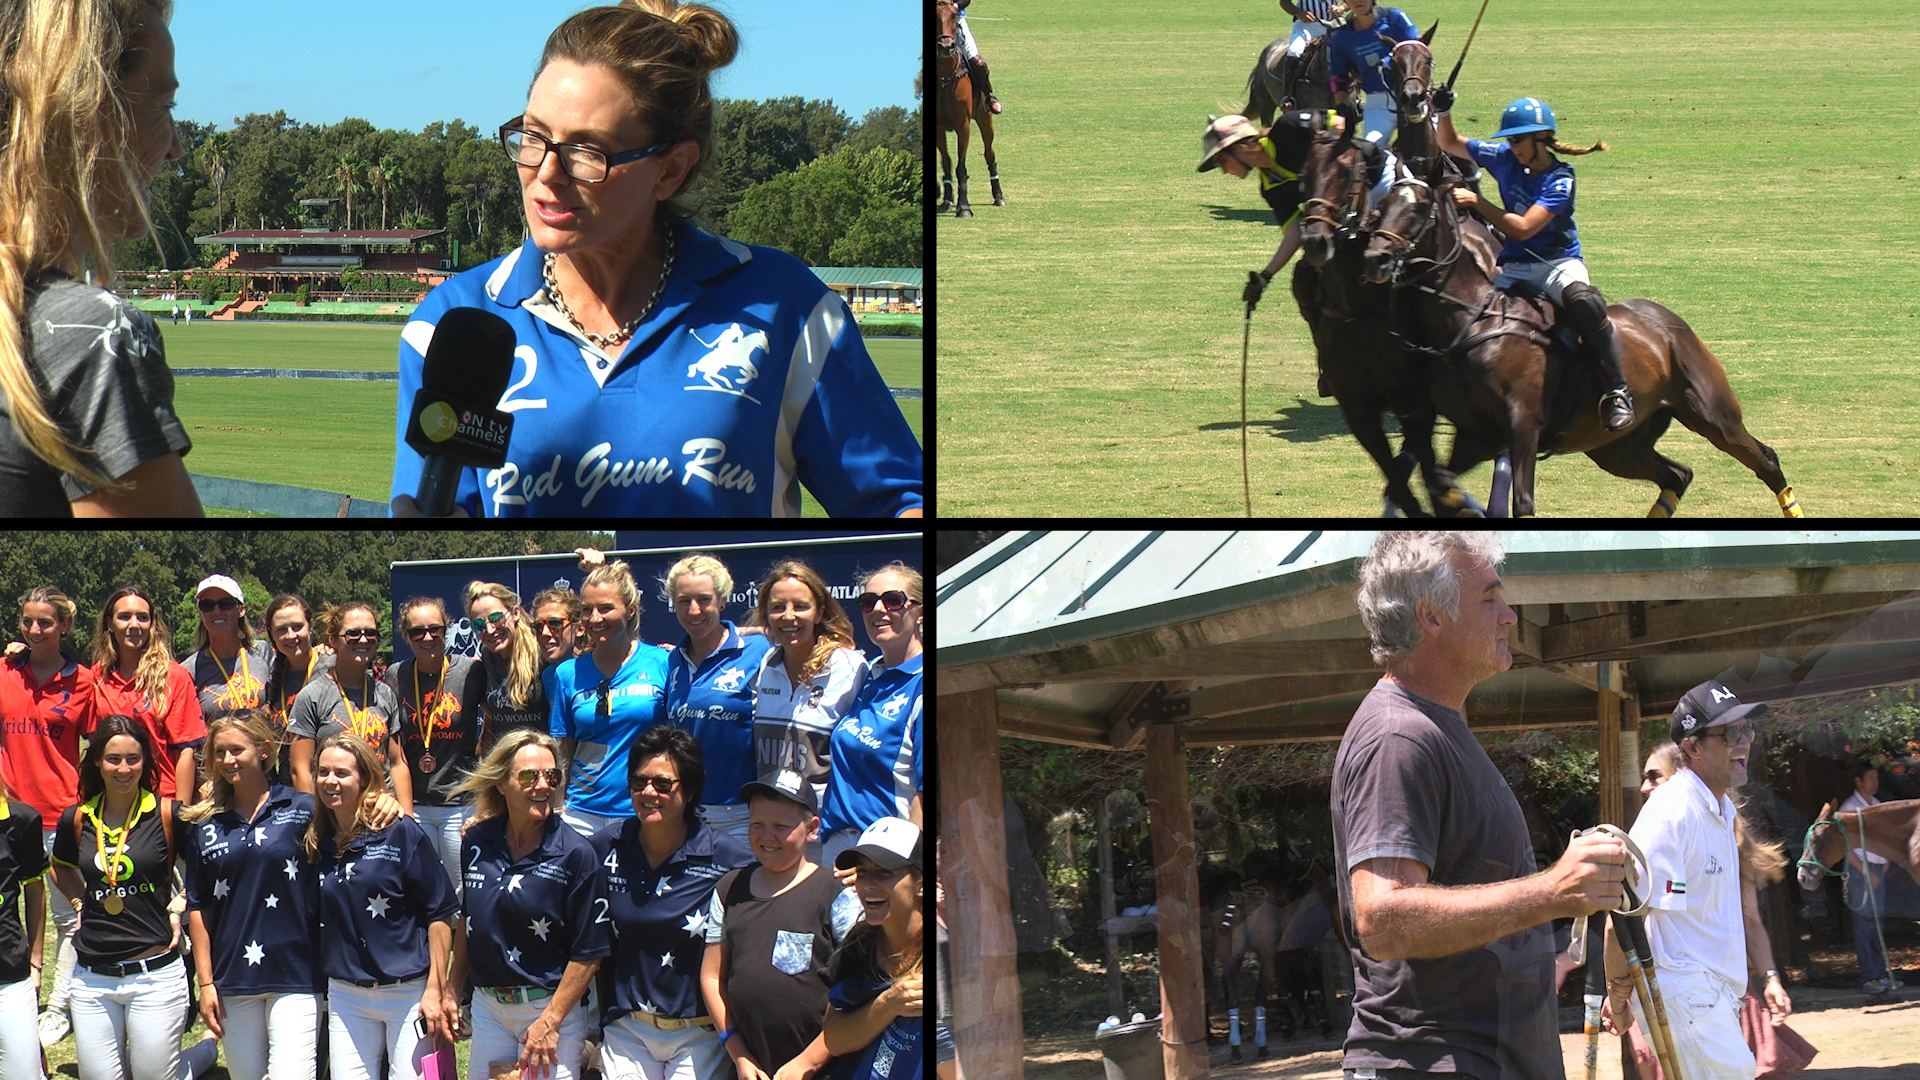 Aussie Teams at Women’s Spanish Polo Championships